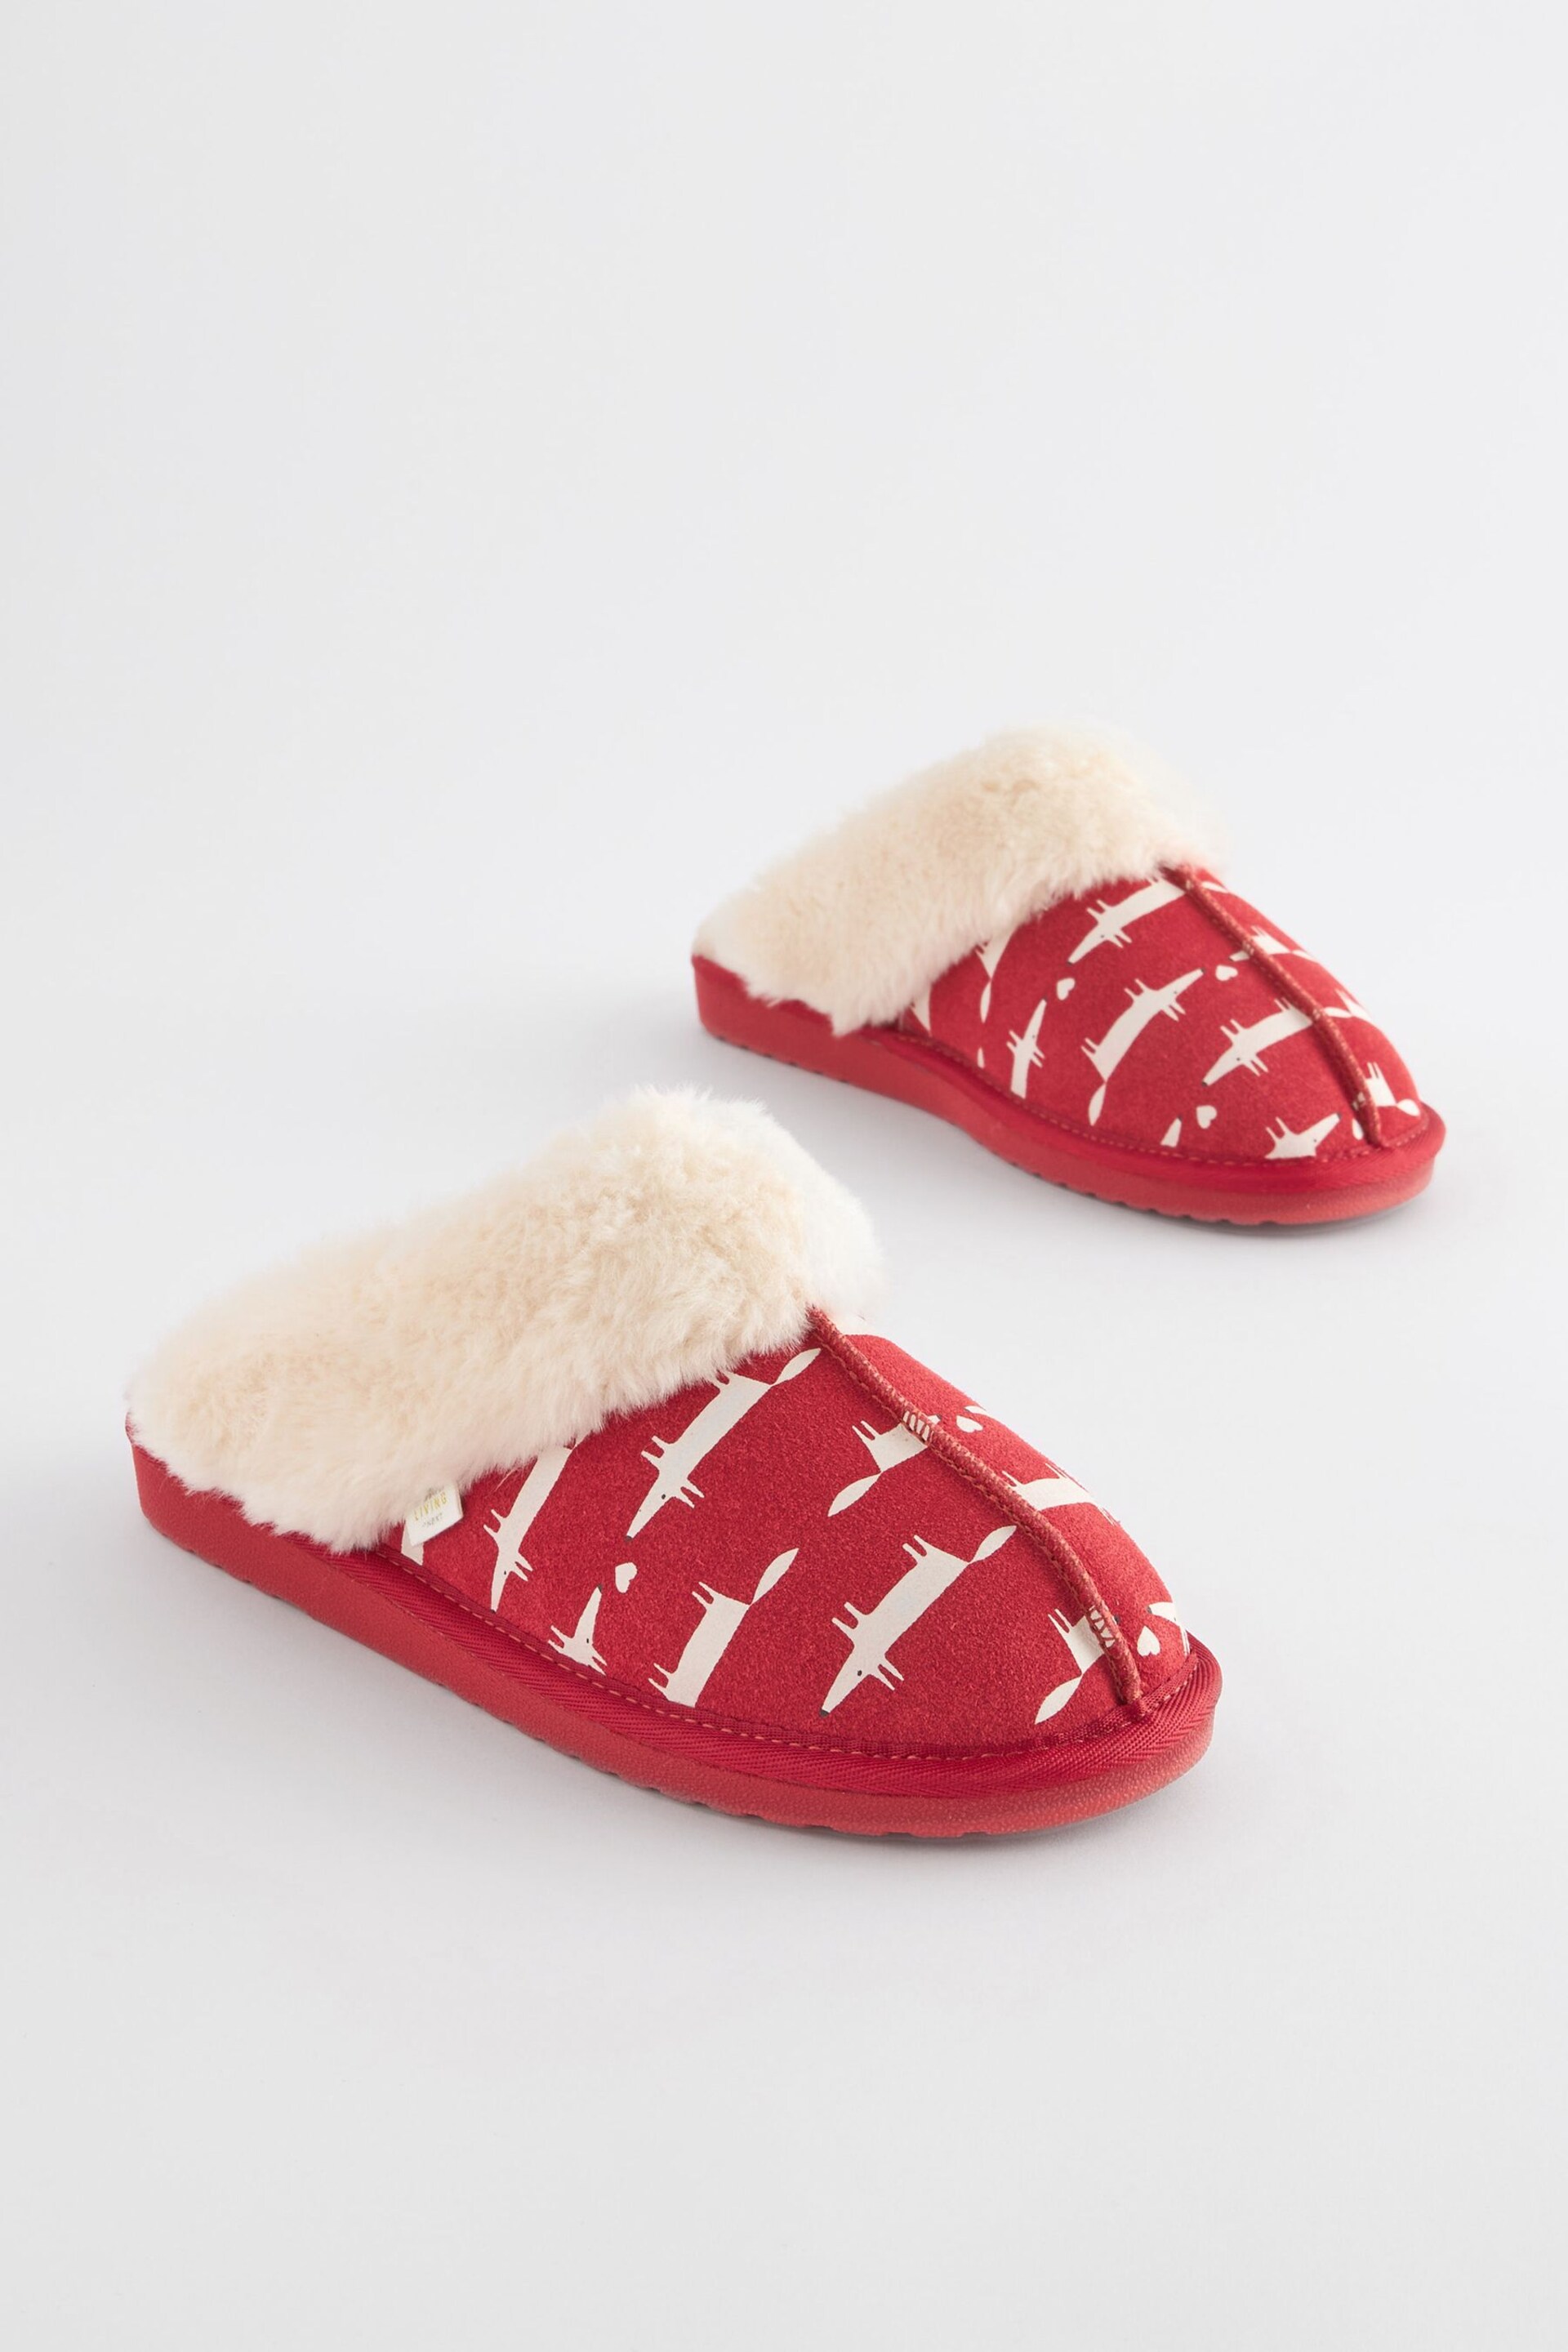 Red Scion Fox Suede Mule Slippers - Image 3 of 7